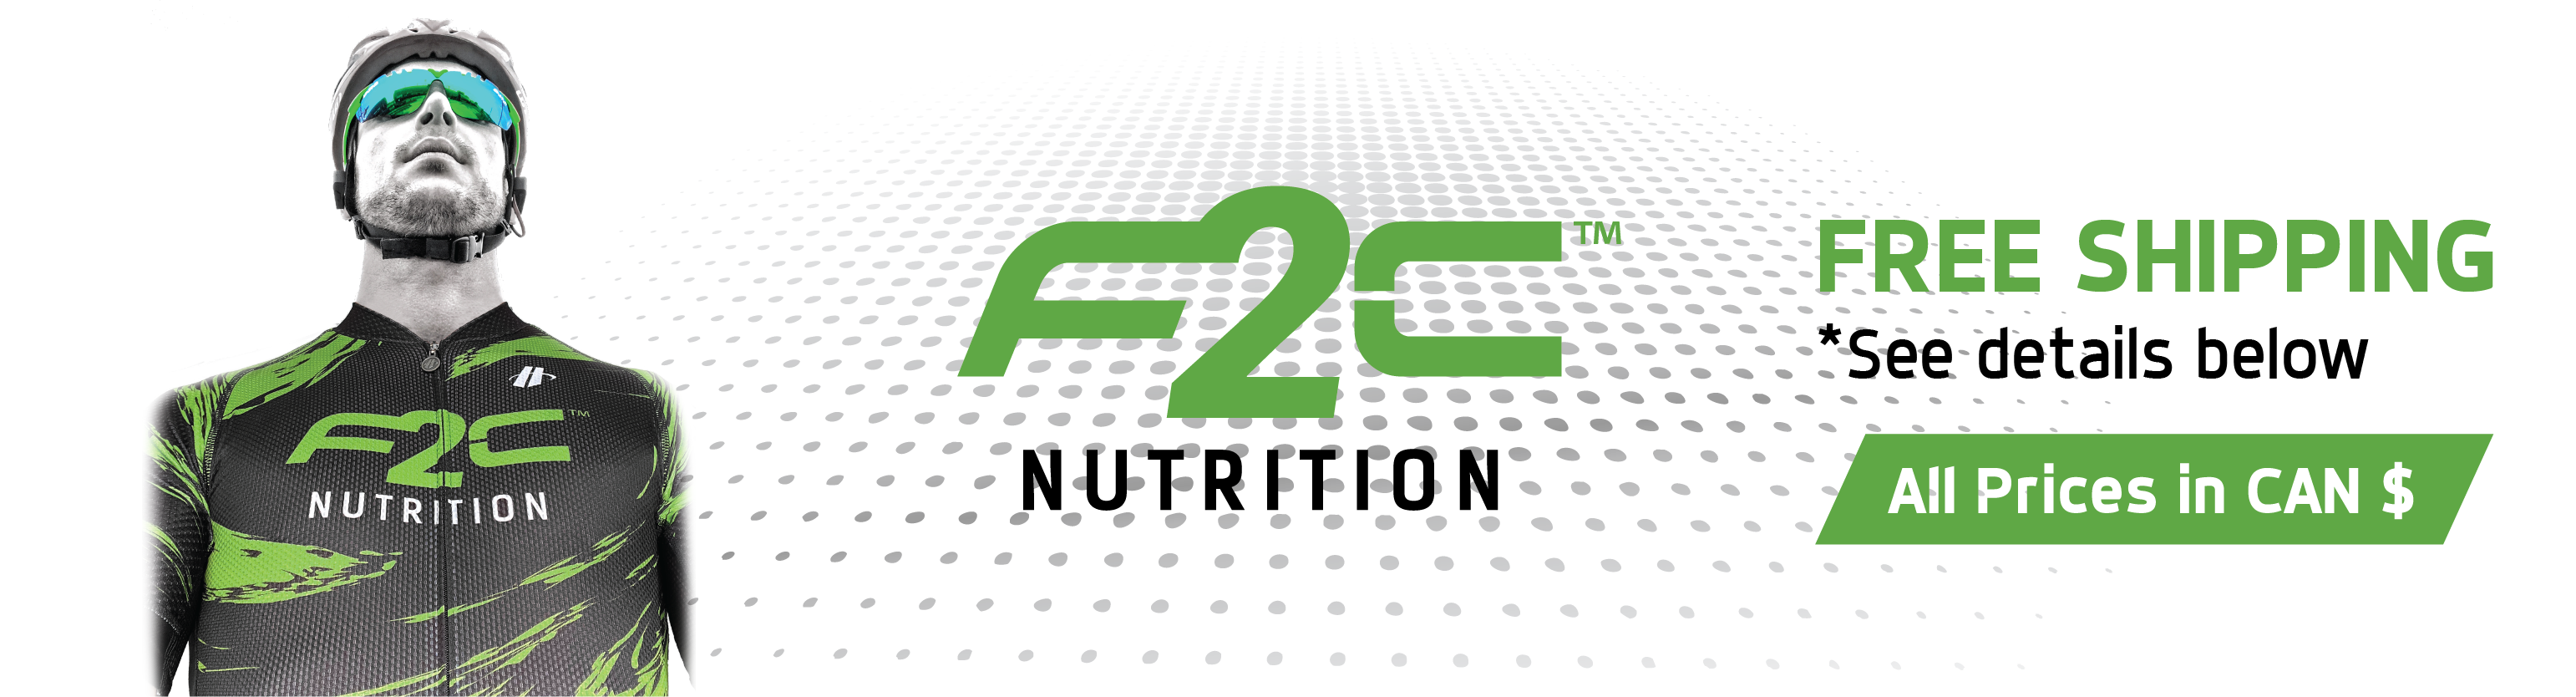 F2C NUTRITION - THE BEST NUTRITION ON EARTH